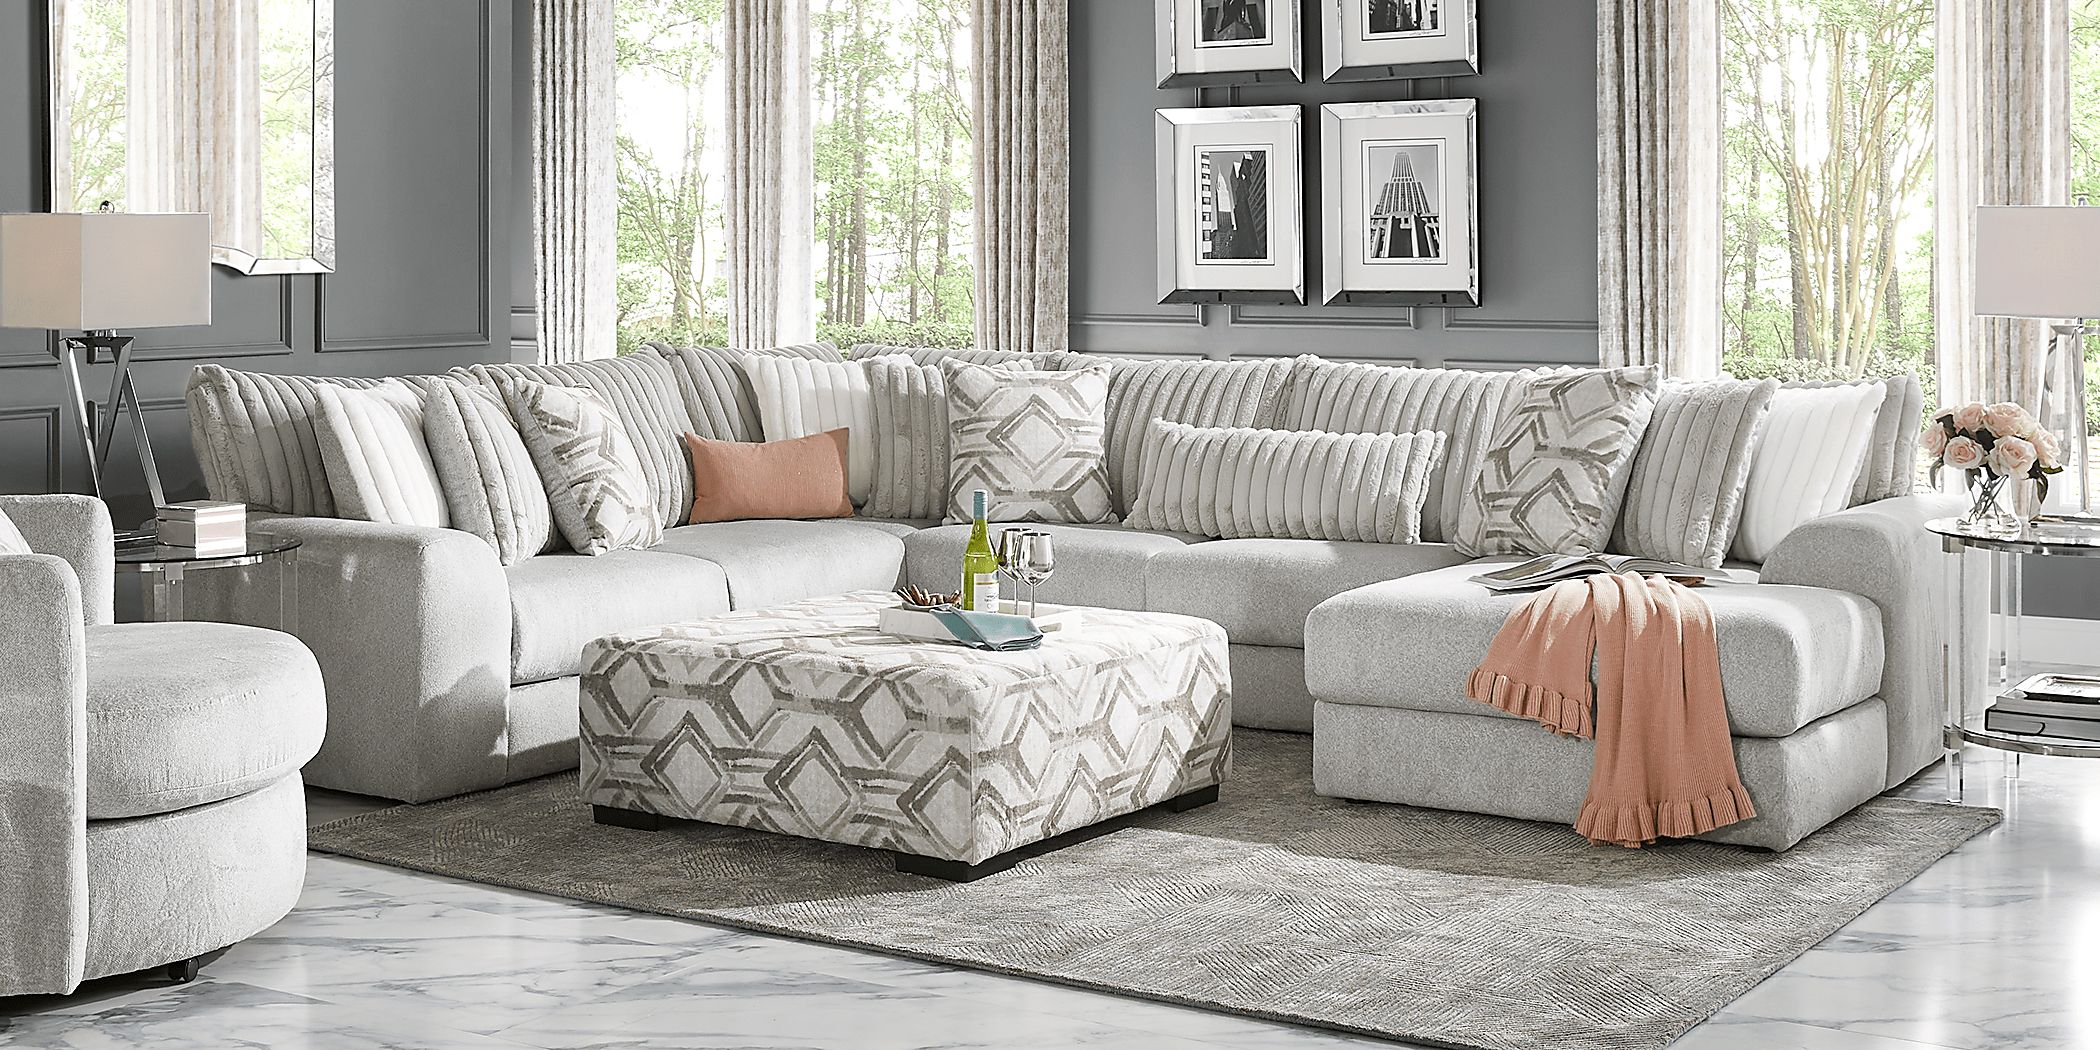 Rooms To Go Moreau Street Gray 6pc Sectional Living Room